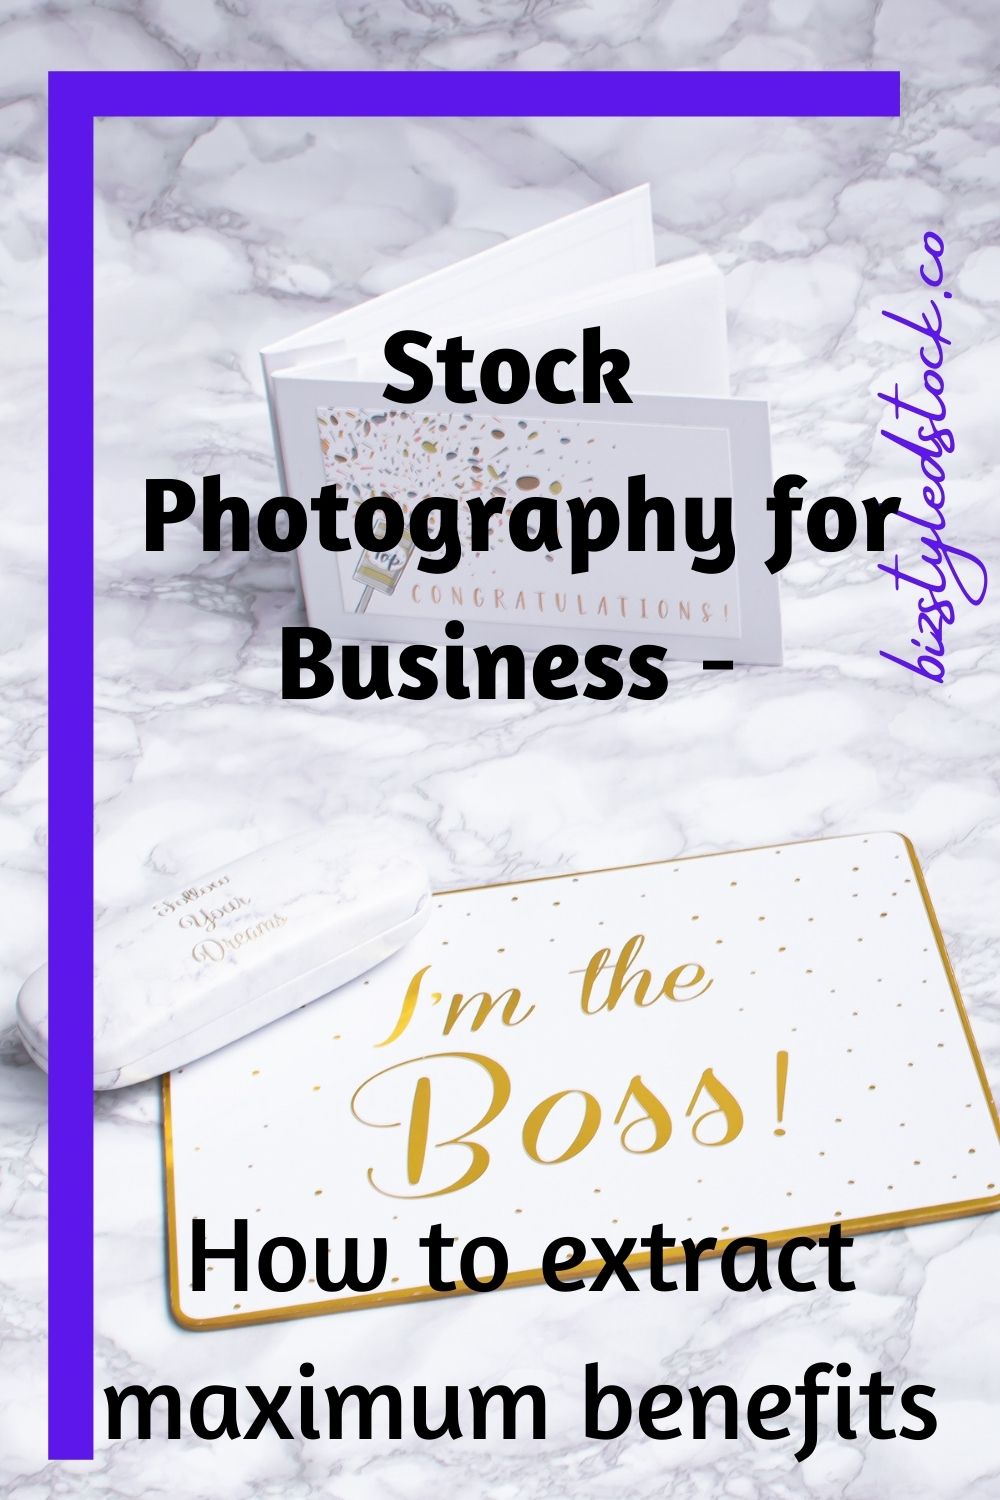 Stock Photography for Business How to extract maximum benefits  stock photos for Instagram stock photos photography stock photos for bloggers feminine stock photos business stock 